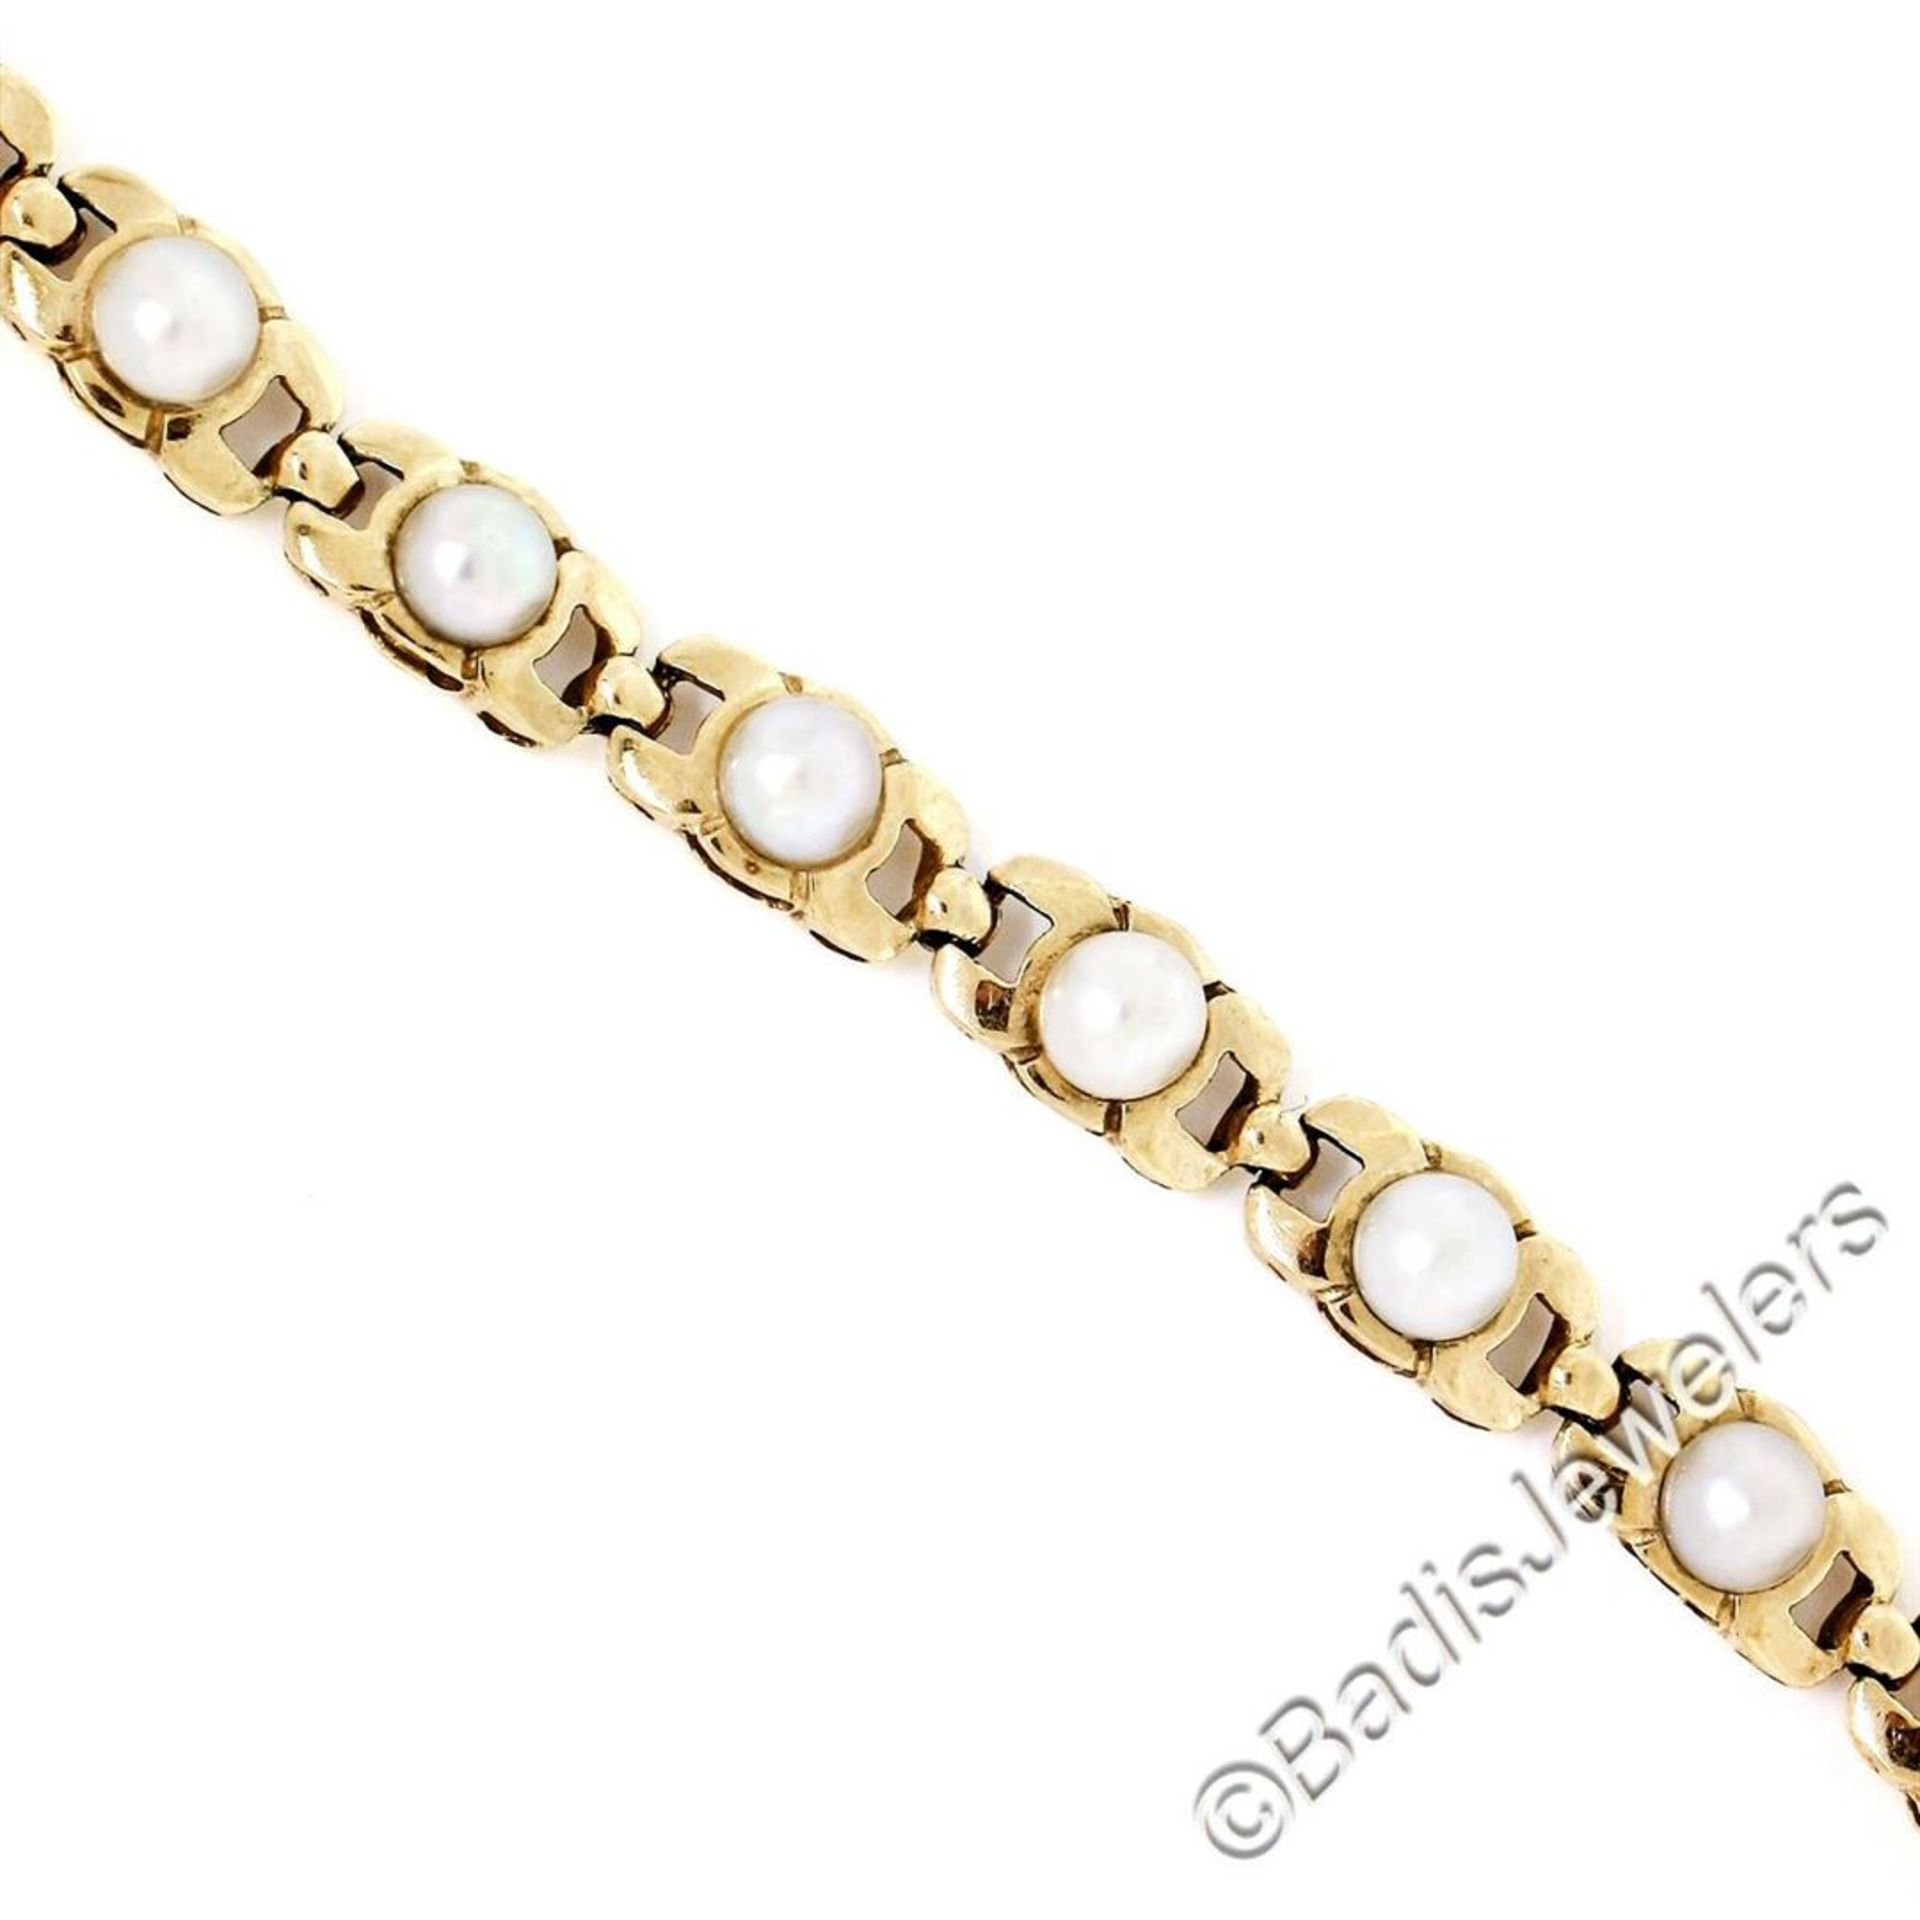 Vintage 14kt Yellow Gold Open Link and Natural Freshwater Pearl Tennis Bracelet - Image 4 of 7